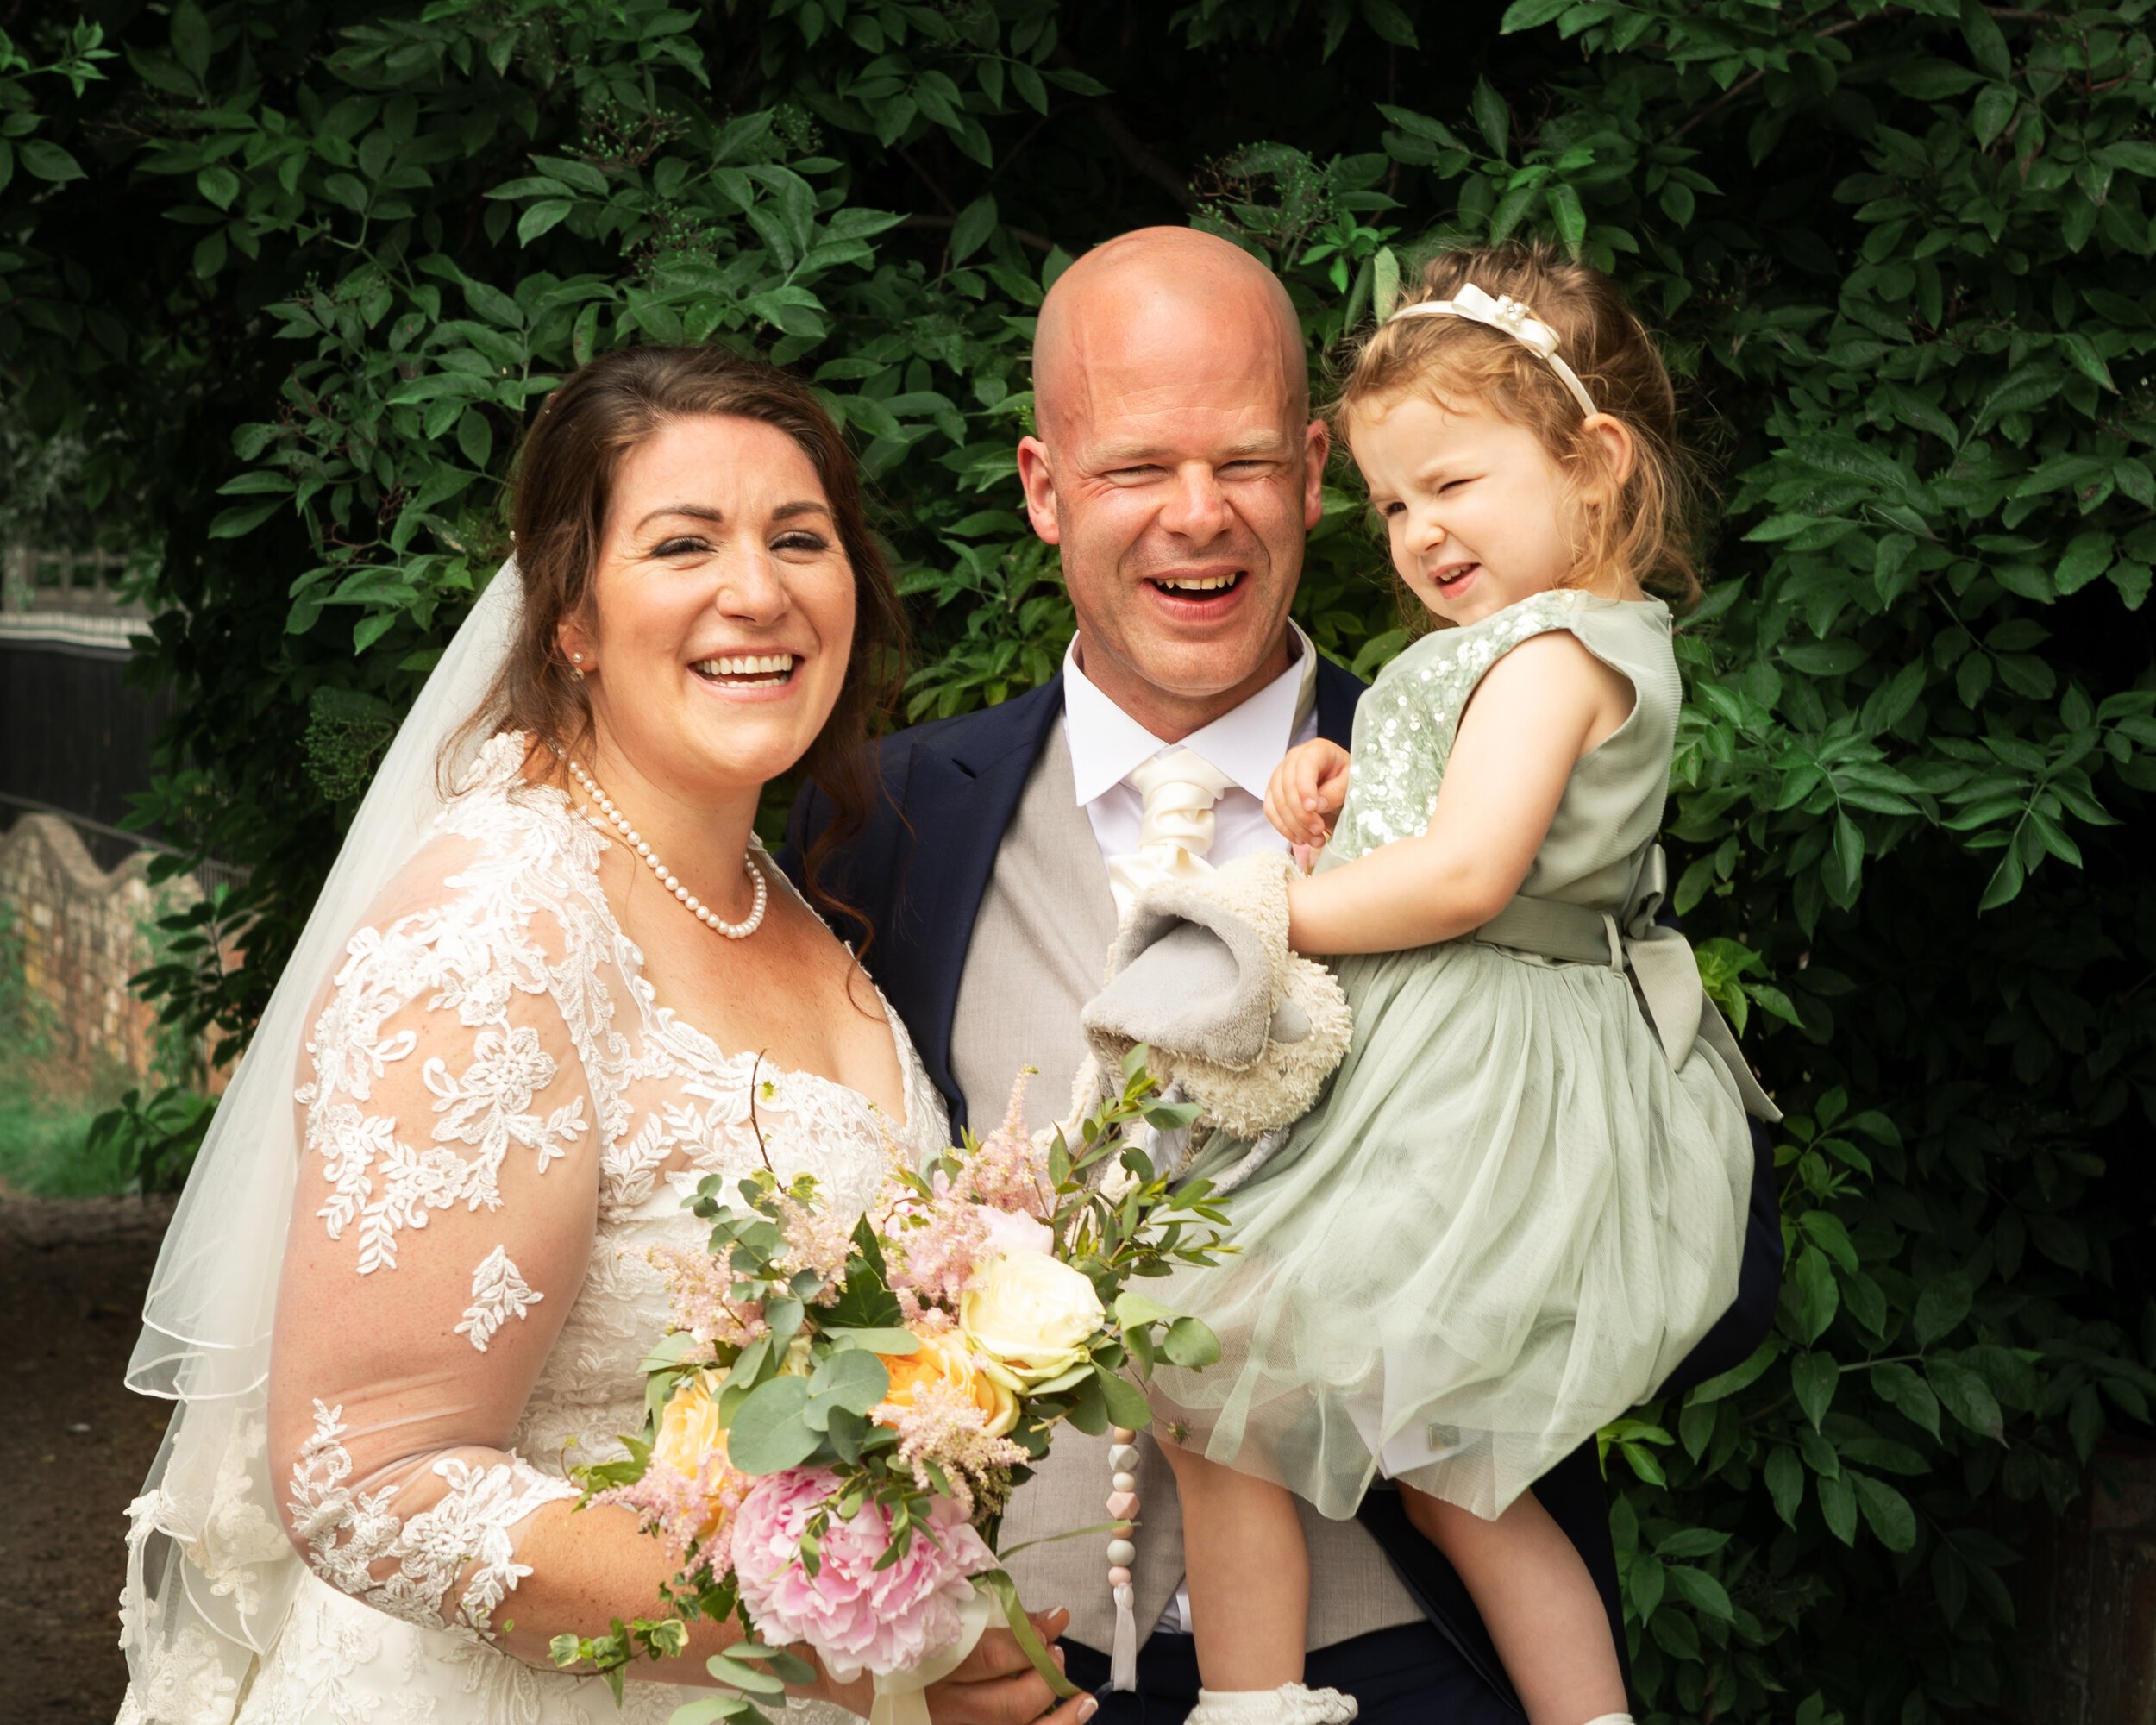 Bride-and-groom-holding-daughter-and-laughing.jpg